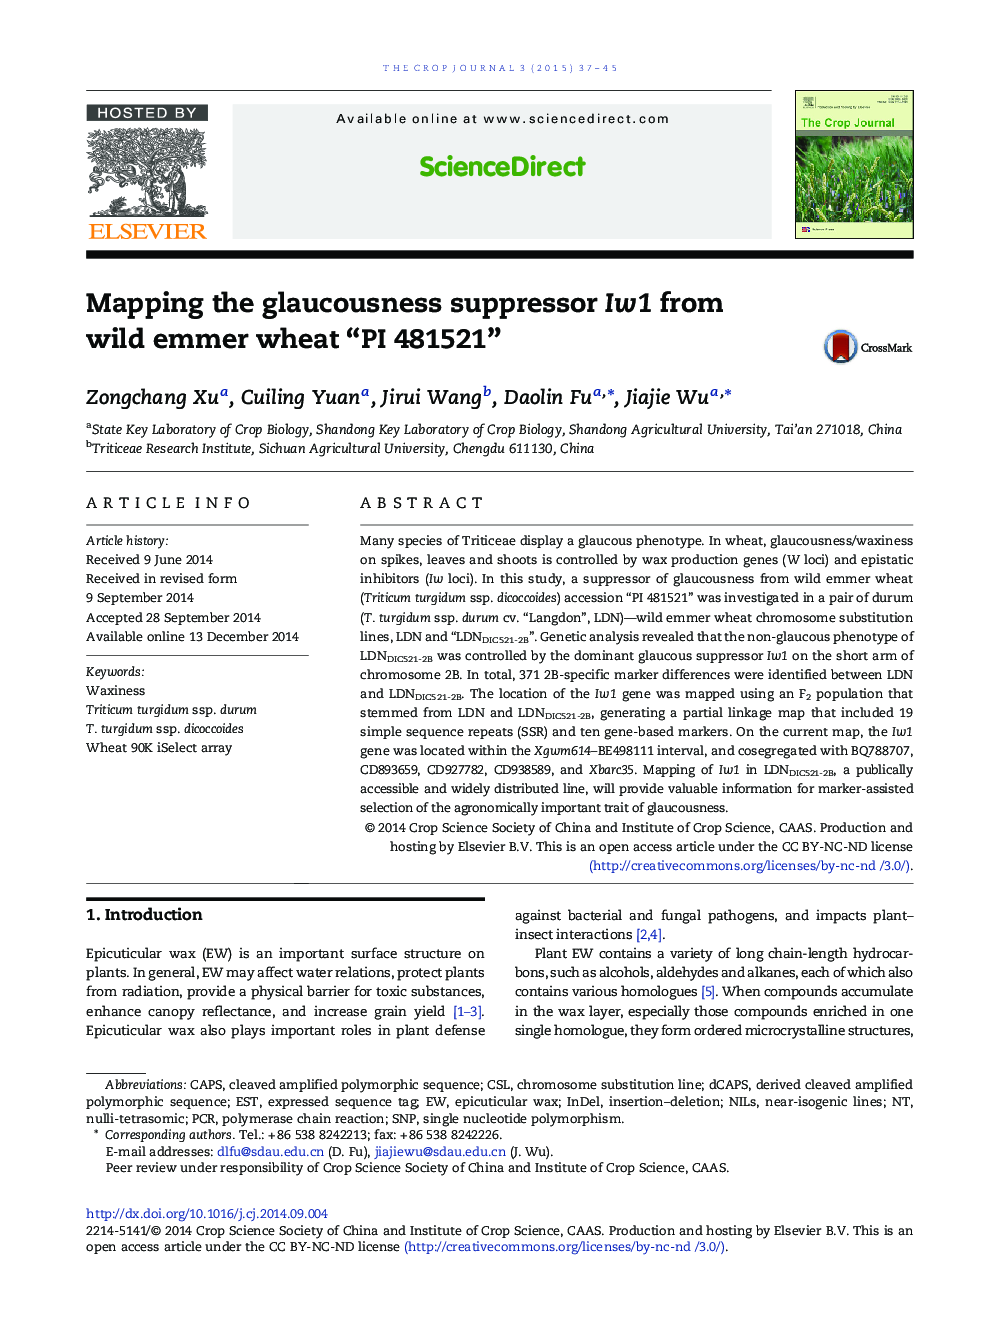 Mapping the glaucousness suppressor Iw1 from wild emmer wheat “PI 481521”